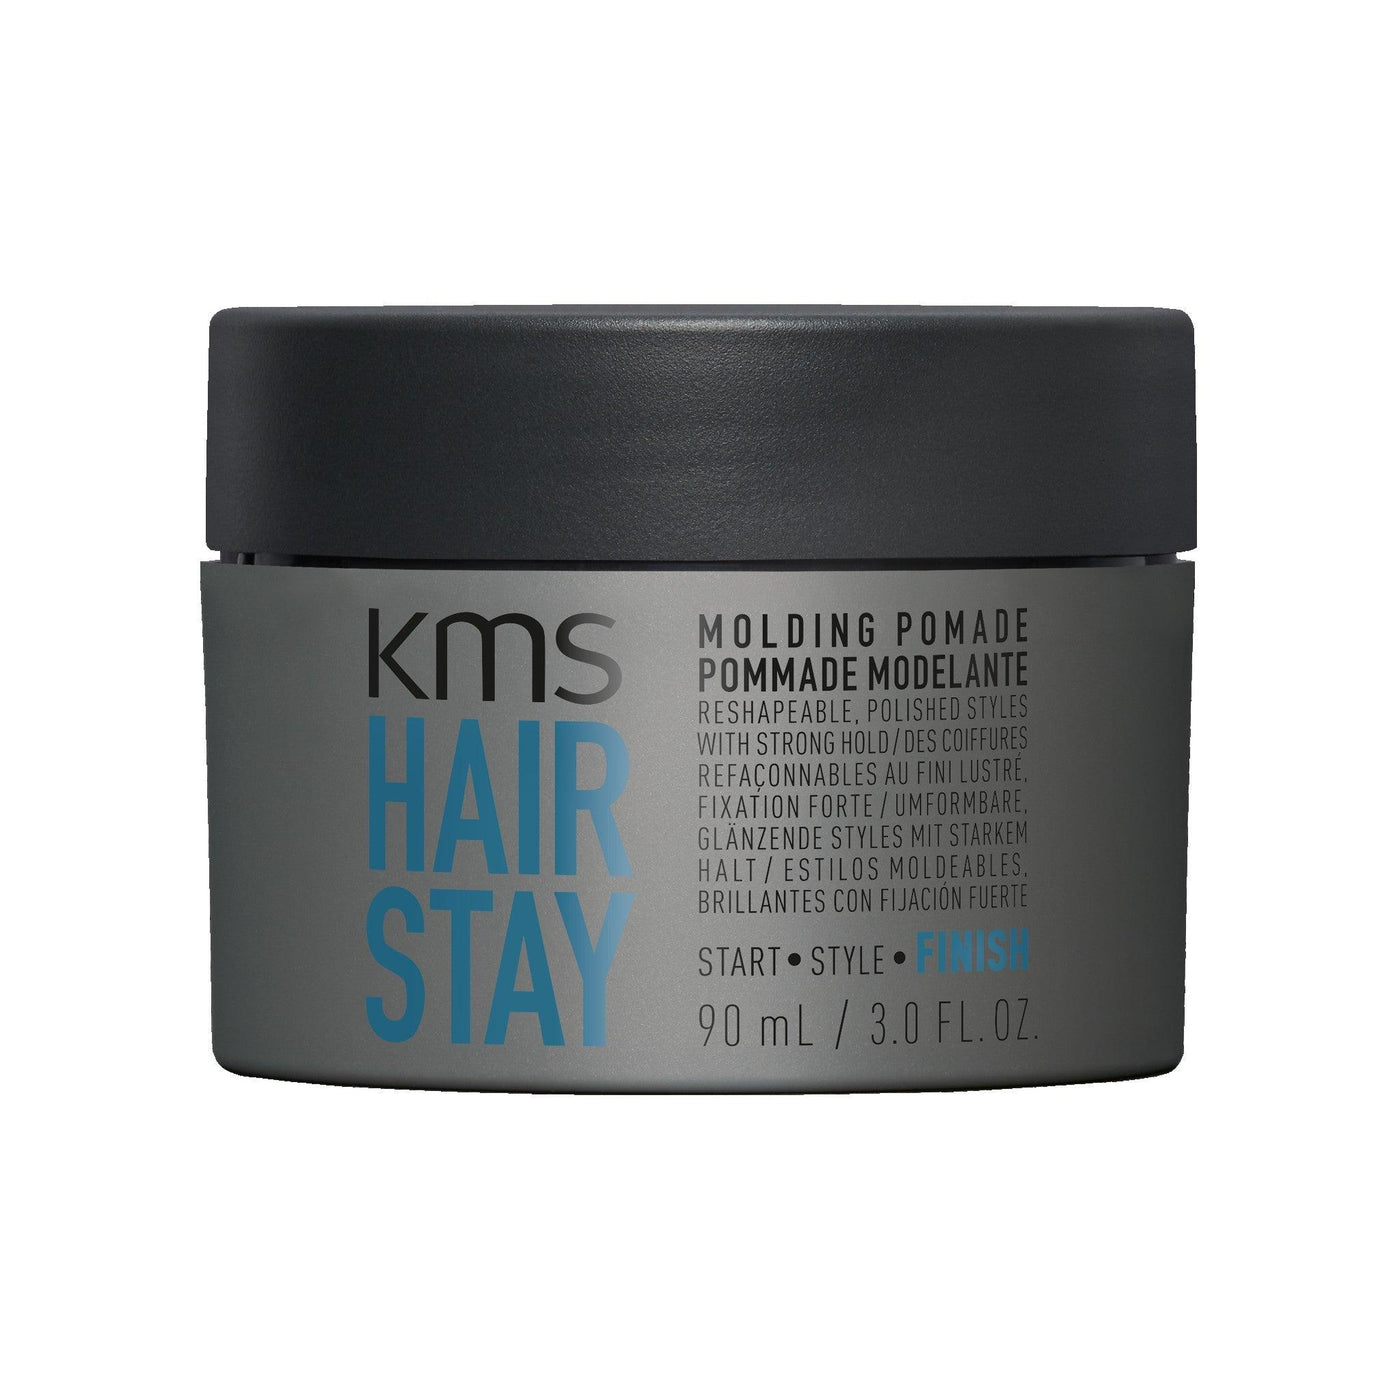 Kms Hairstay Molding Pomade 90ml KMS Boutique Deauville